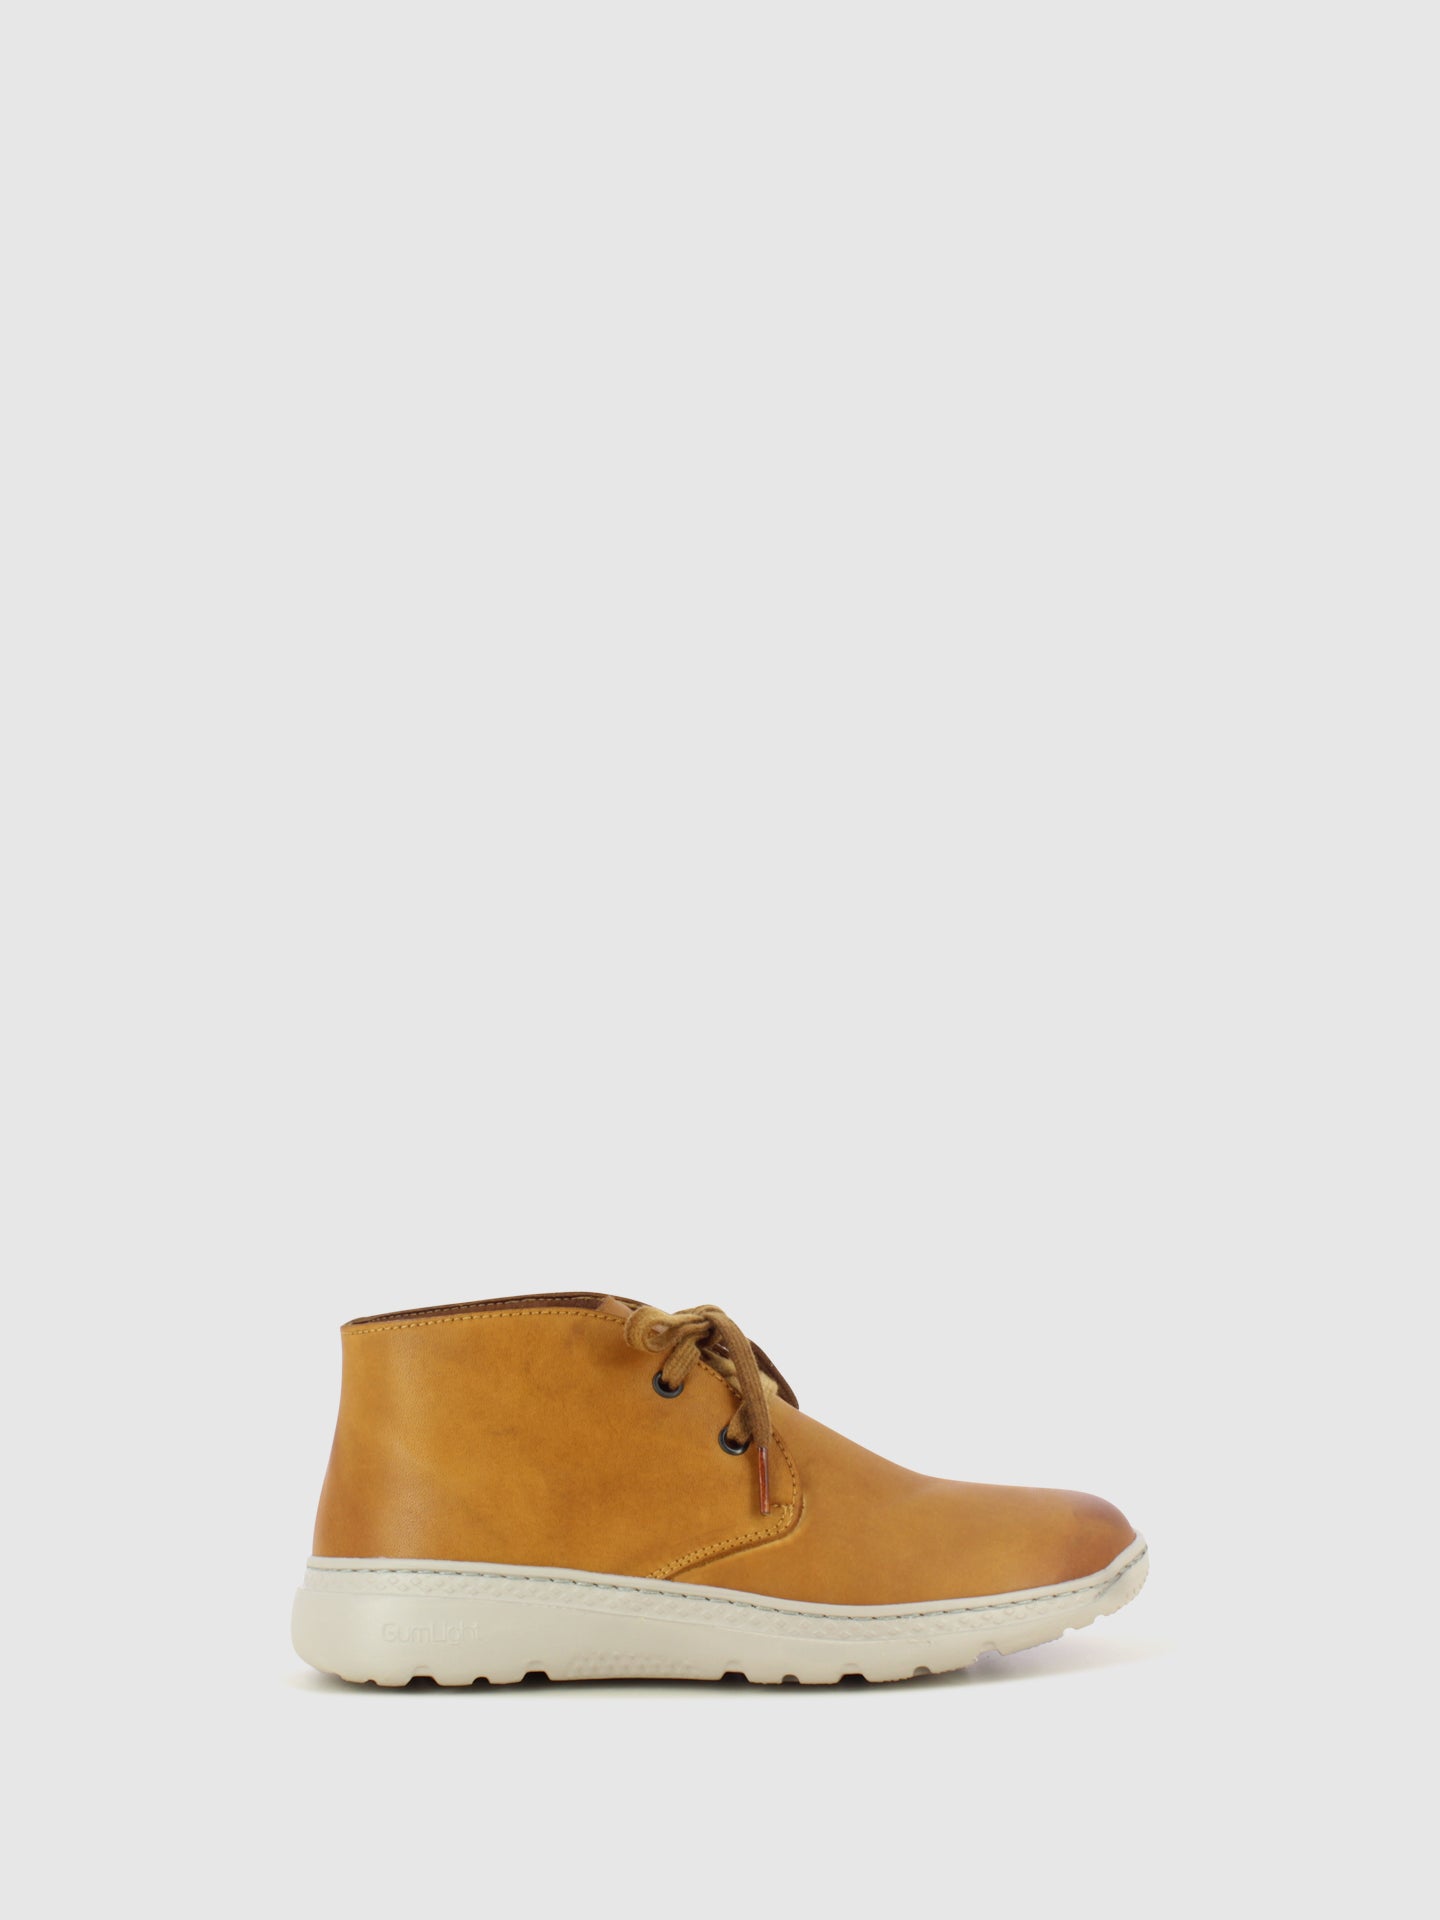 On Foot Camel Lace-up Ankle Boots